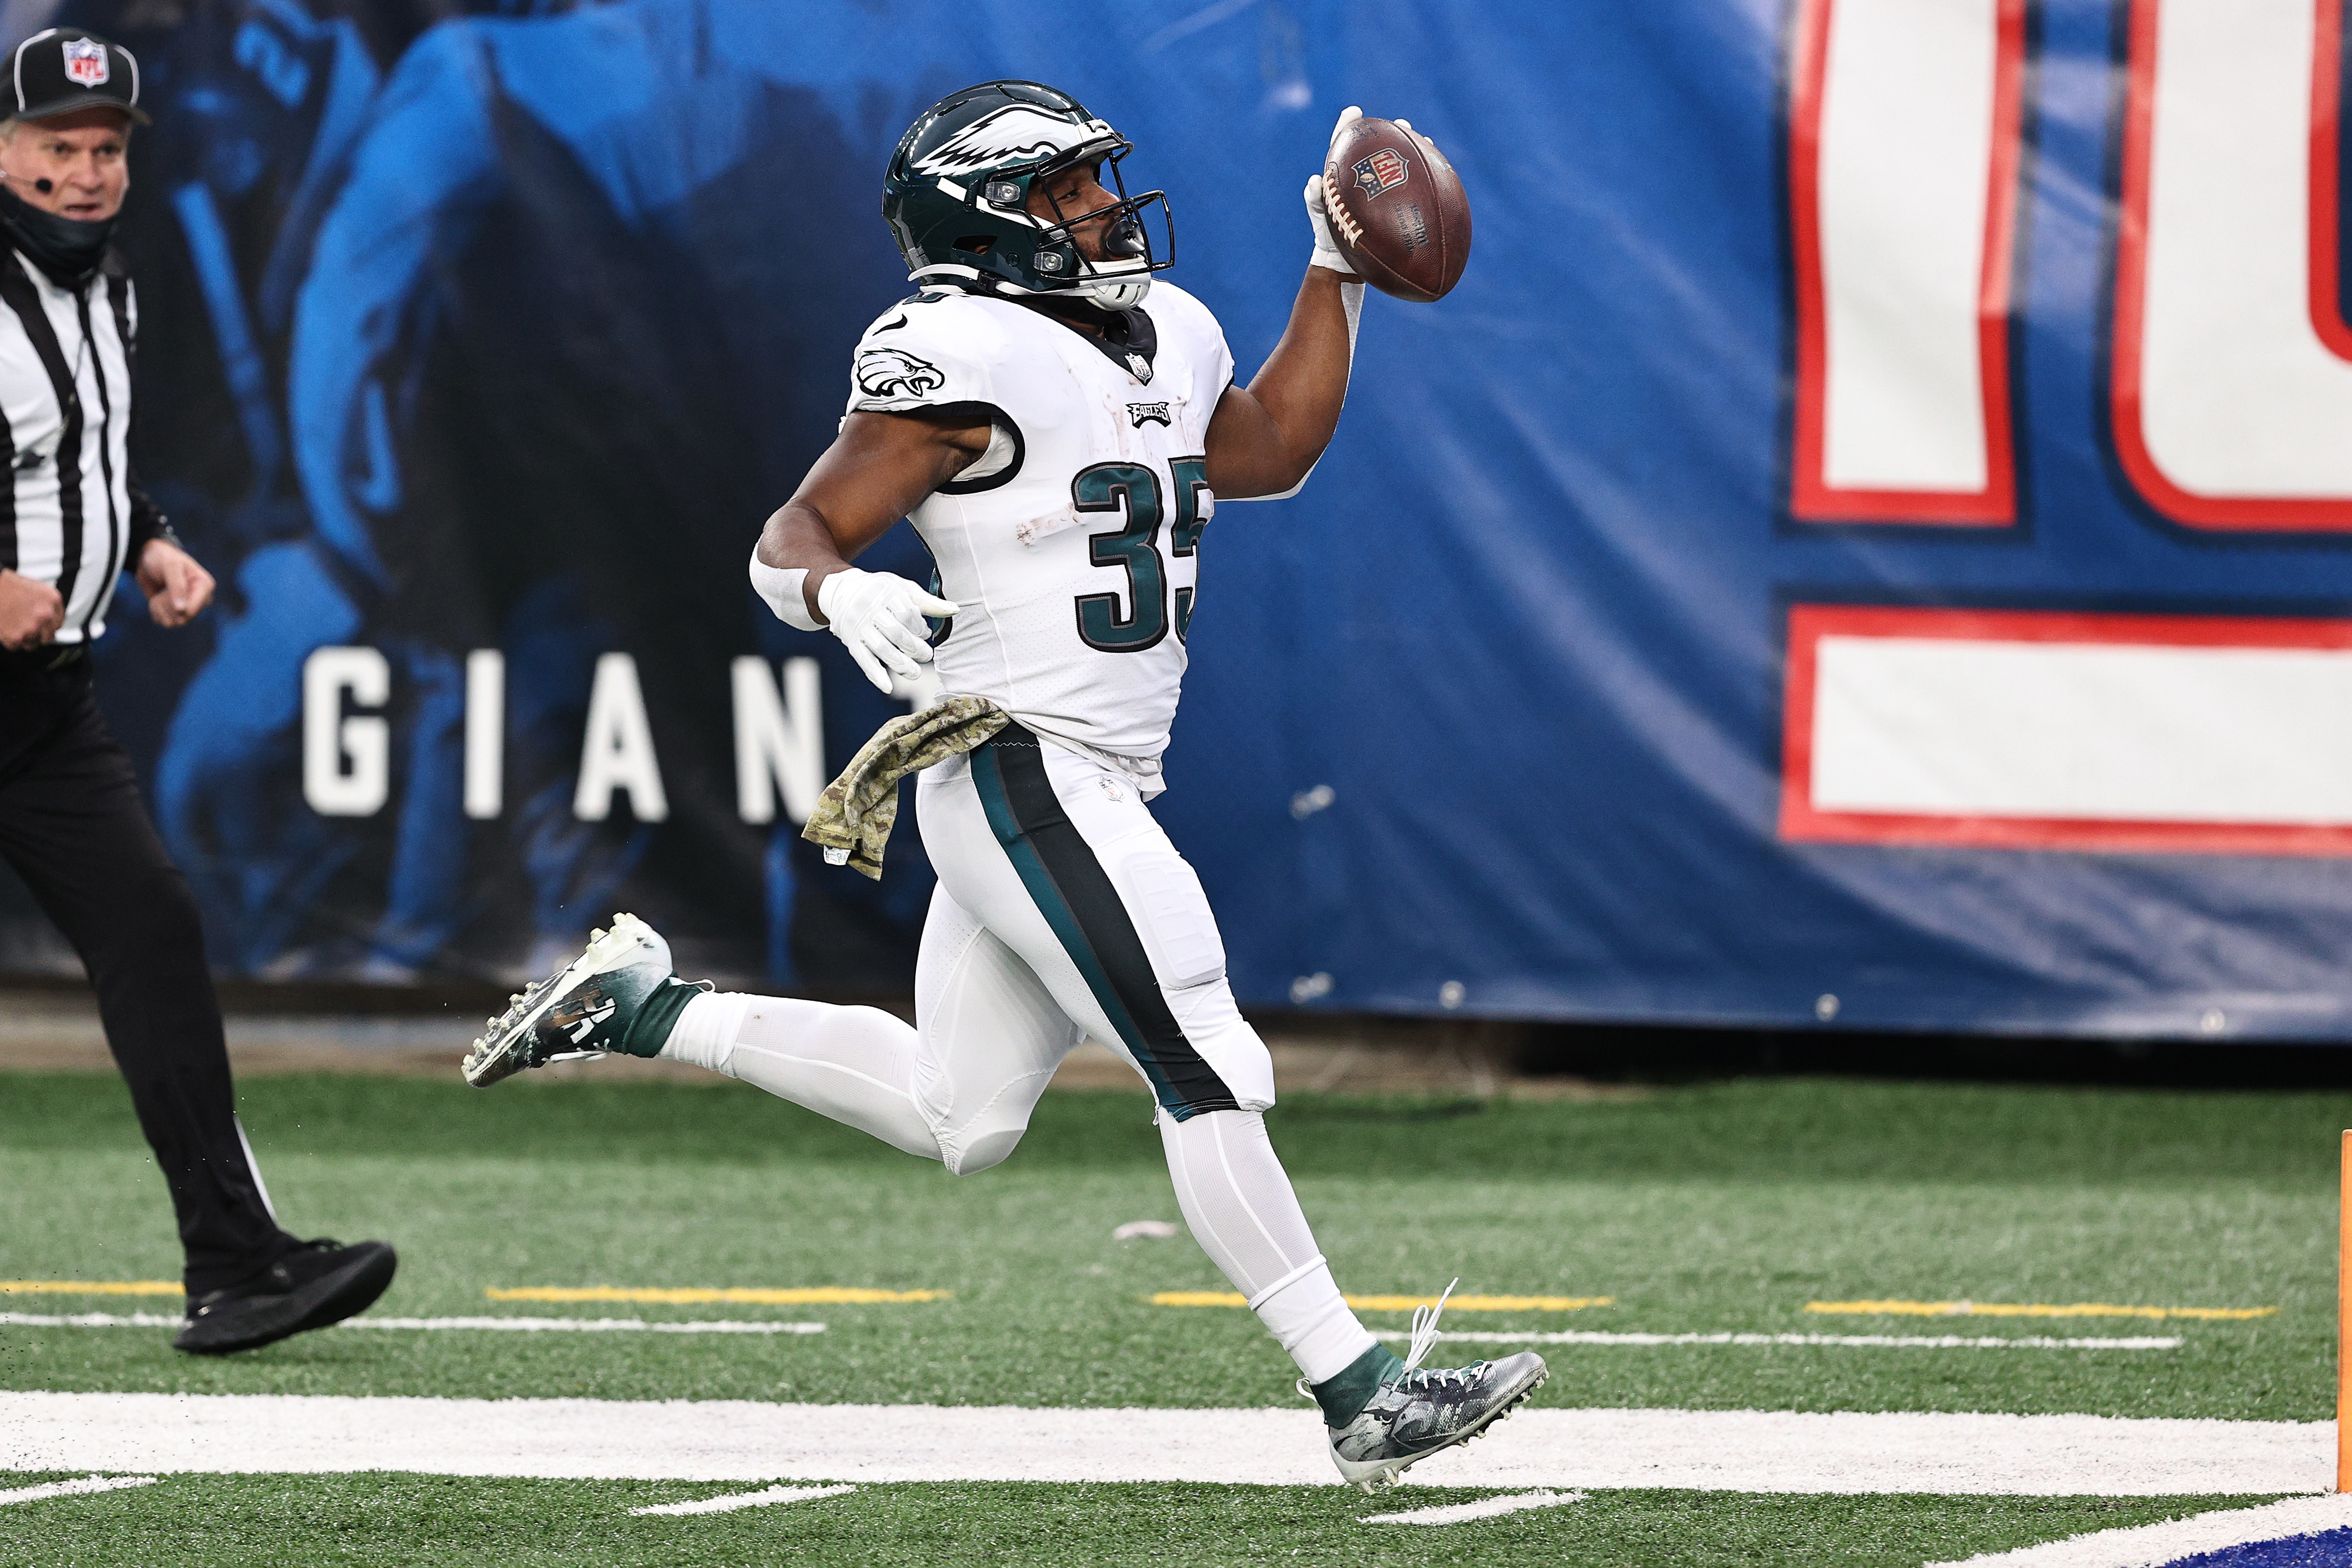 Boston Scott #35 of the Philadelphia Eagles runs the ball into the end zone for a touchdown during the second half against the New York Giants at MetLife Stadium on November 15, 2020 in East Rutherford, New Jersey.